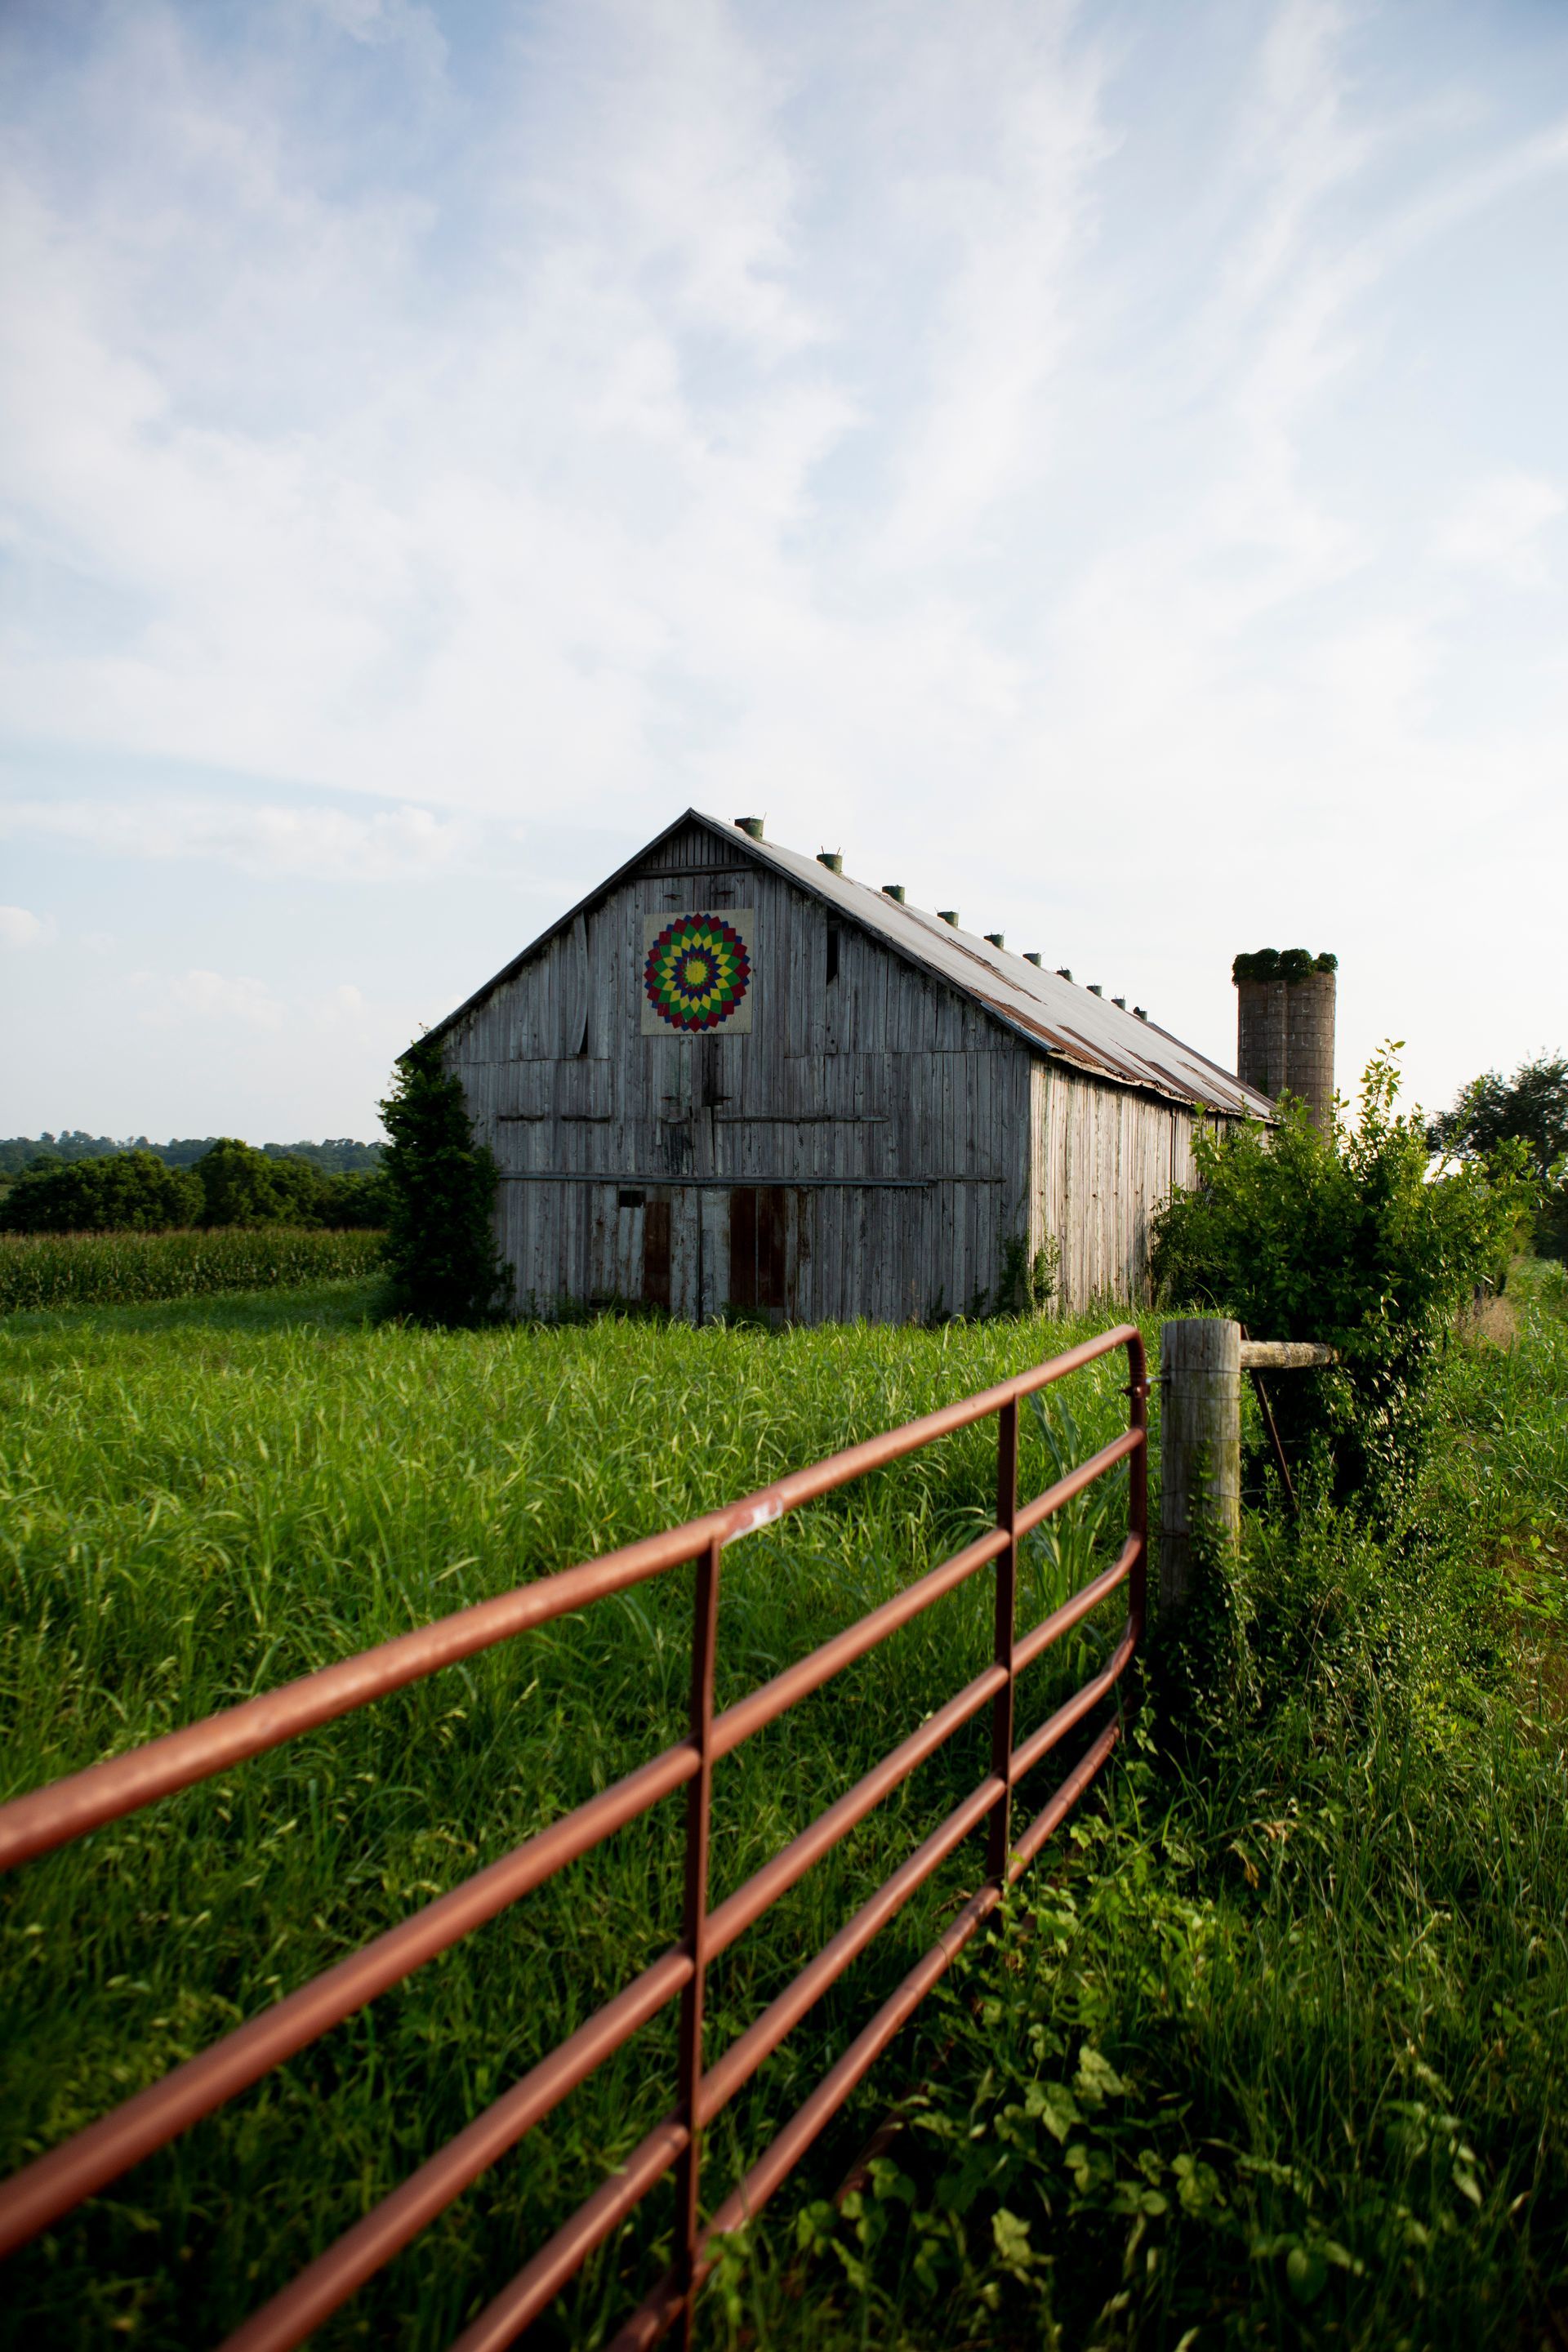 a barn is sitting in the middle of a grassy field next to a fence .